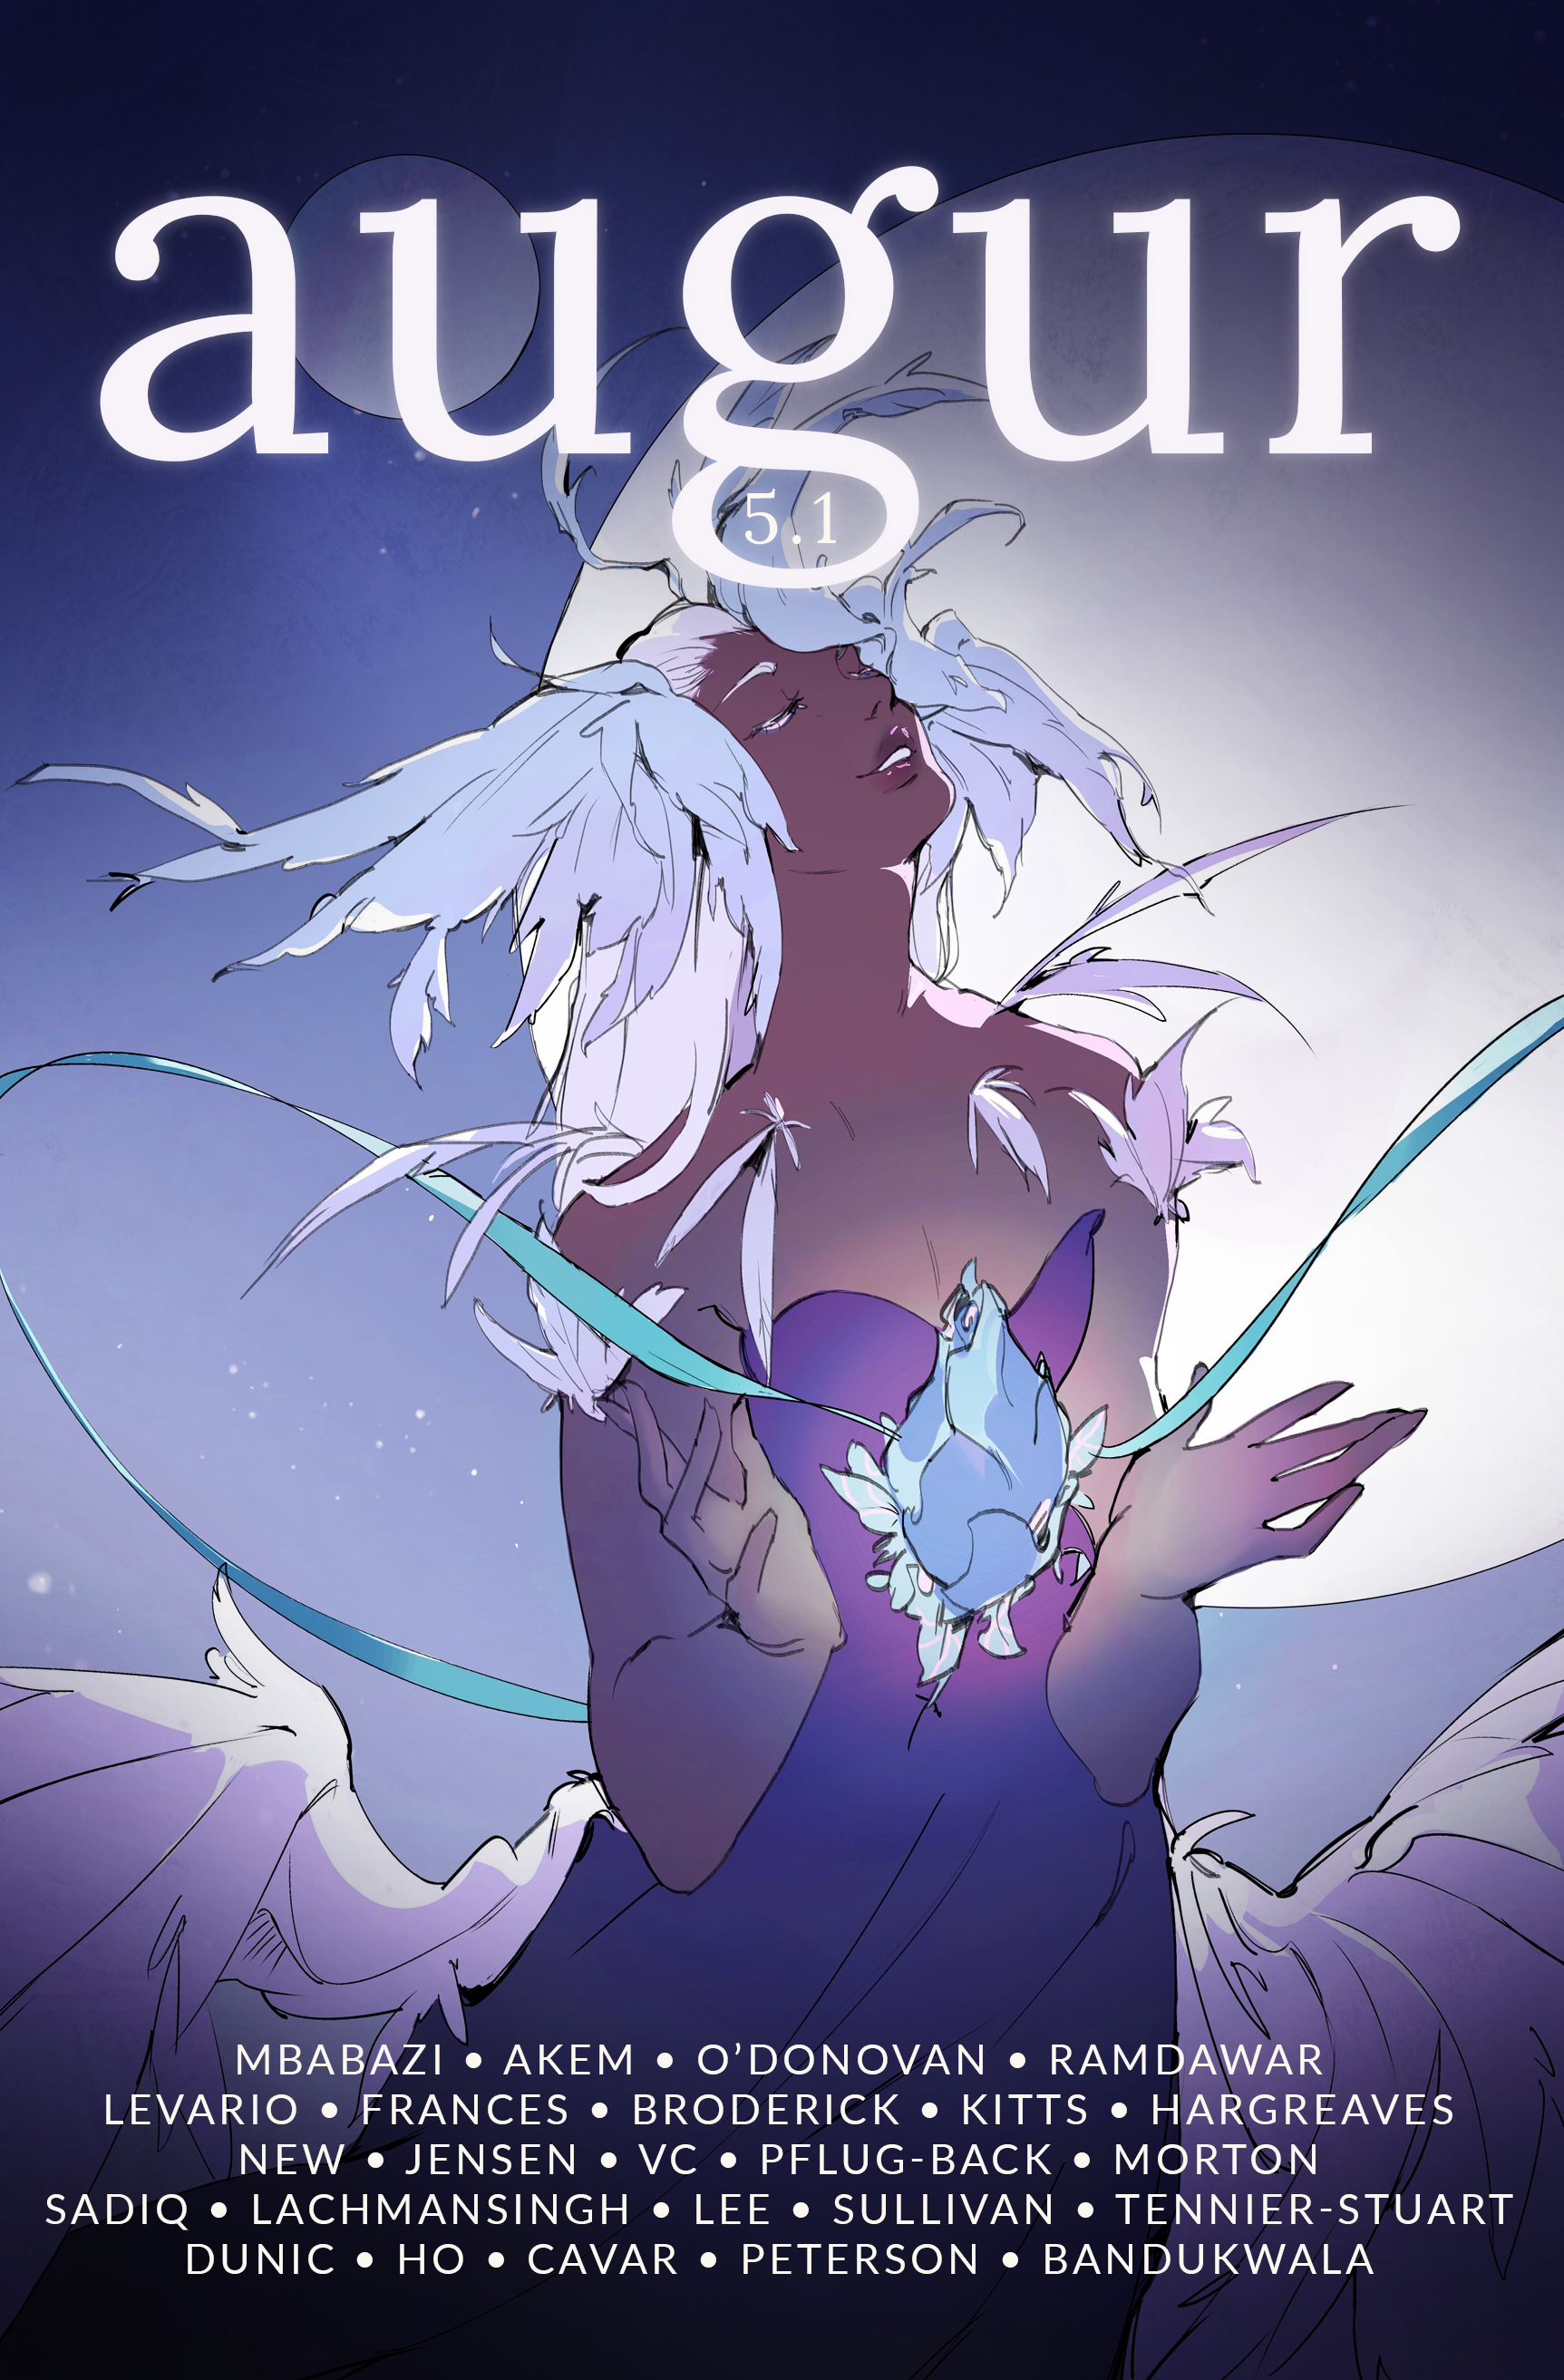 Augur 5.1 cover featuring a dark skinned figure with feathers haloing their head as they cradle a glowing, otherworldly flowerbud. Two background moons shine on their outspread wings.